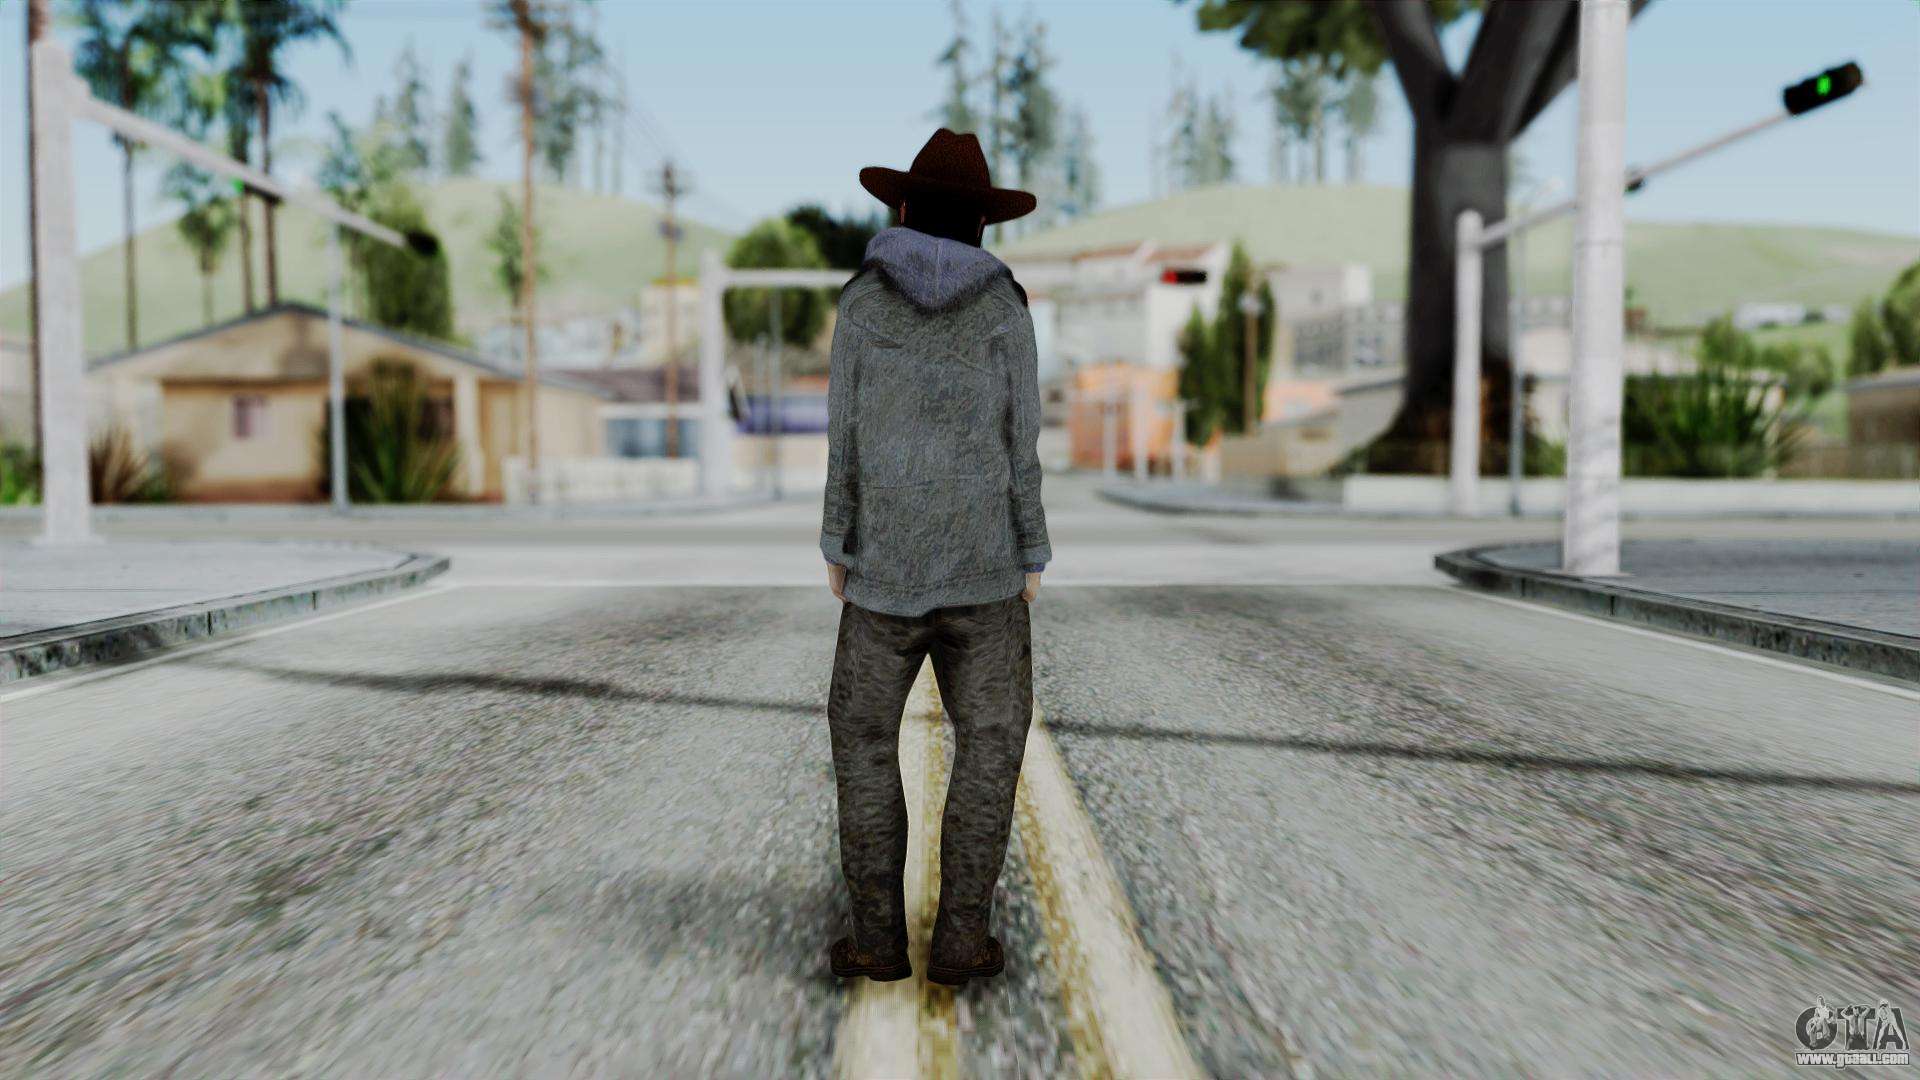 Carl Grimes from The Walking Dead for GTA San Andreas